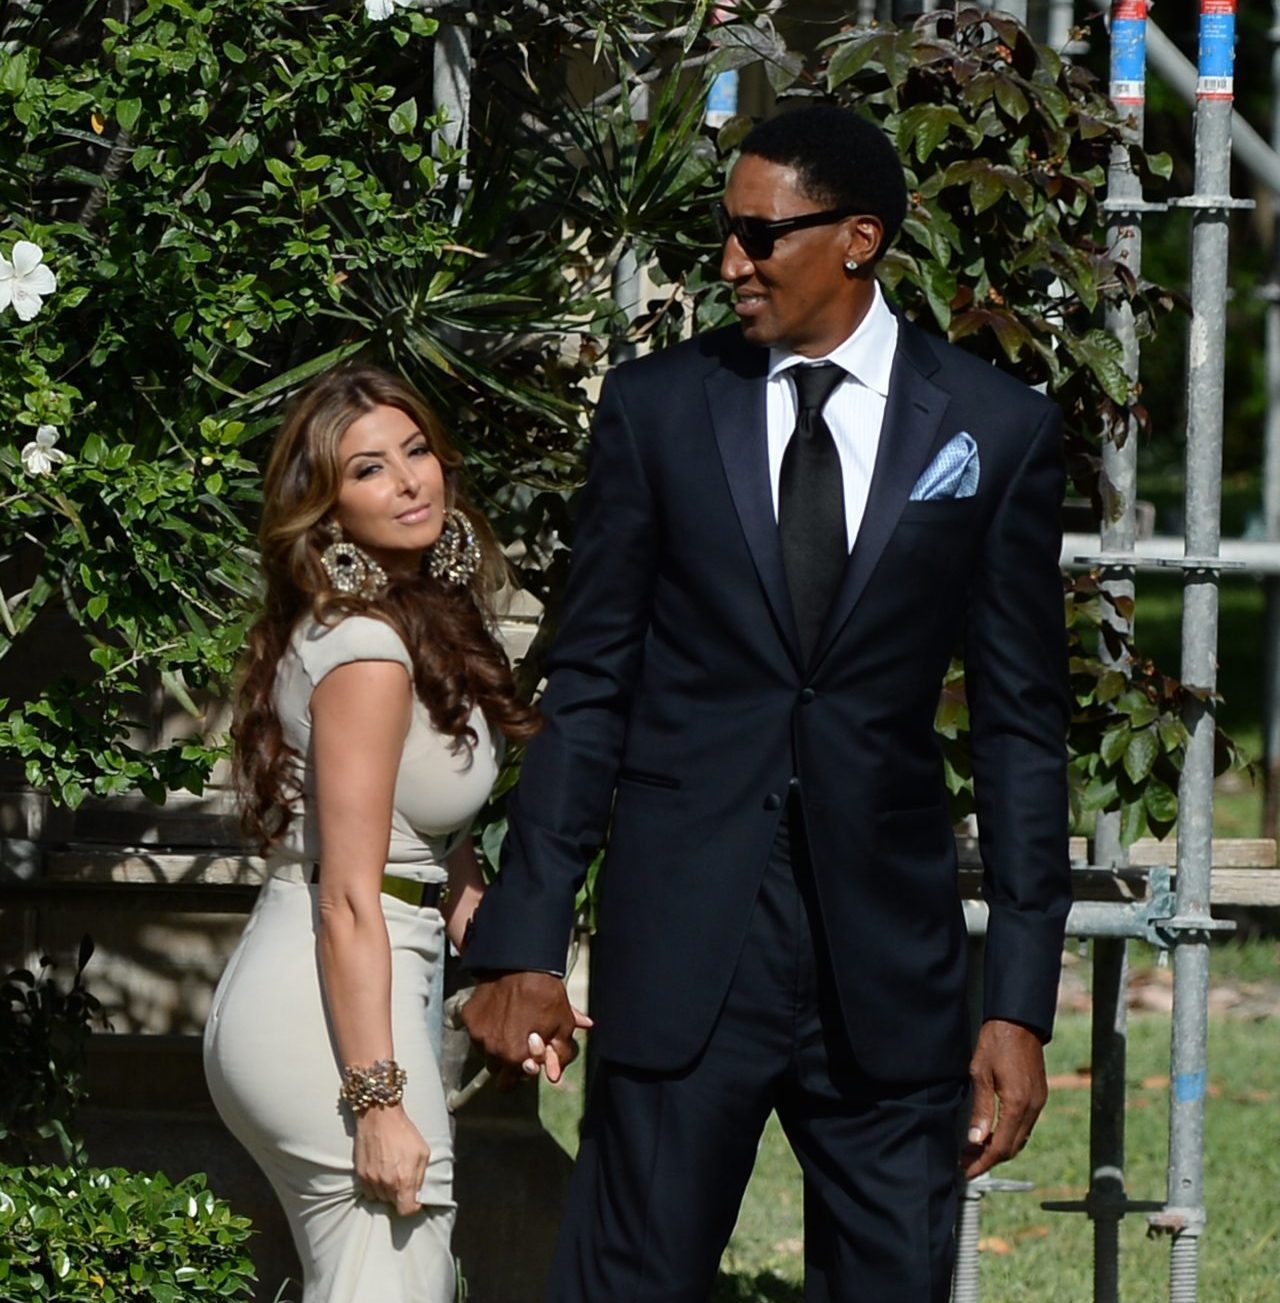 Larsa Pippen Claims She Didn't Know Marcus Jordan Or His Family When She Married Scottie Pippen